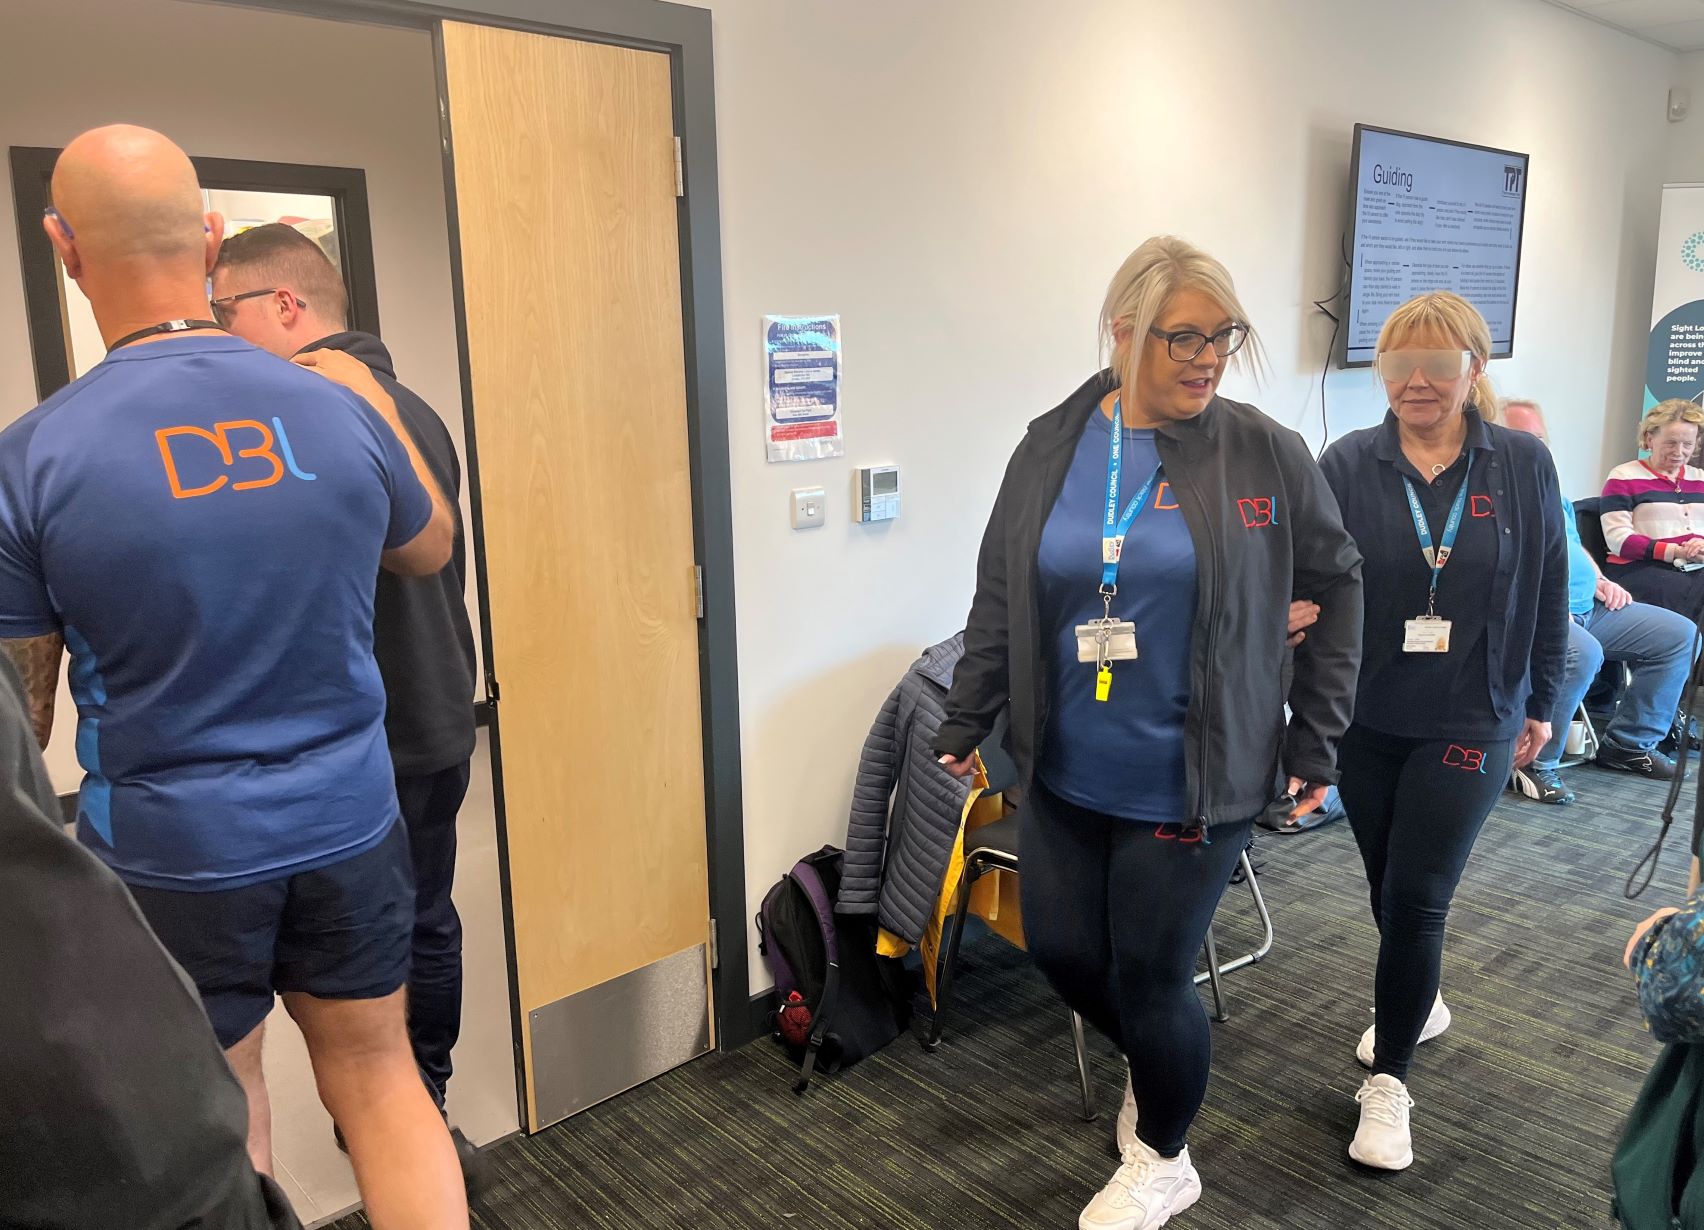 Staff from Duncan Edwards leisure centre are participating in a sighted guiding exercise. One person is guiding, the other is wearing sim specs.